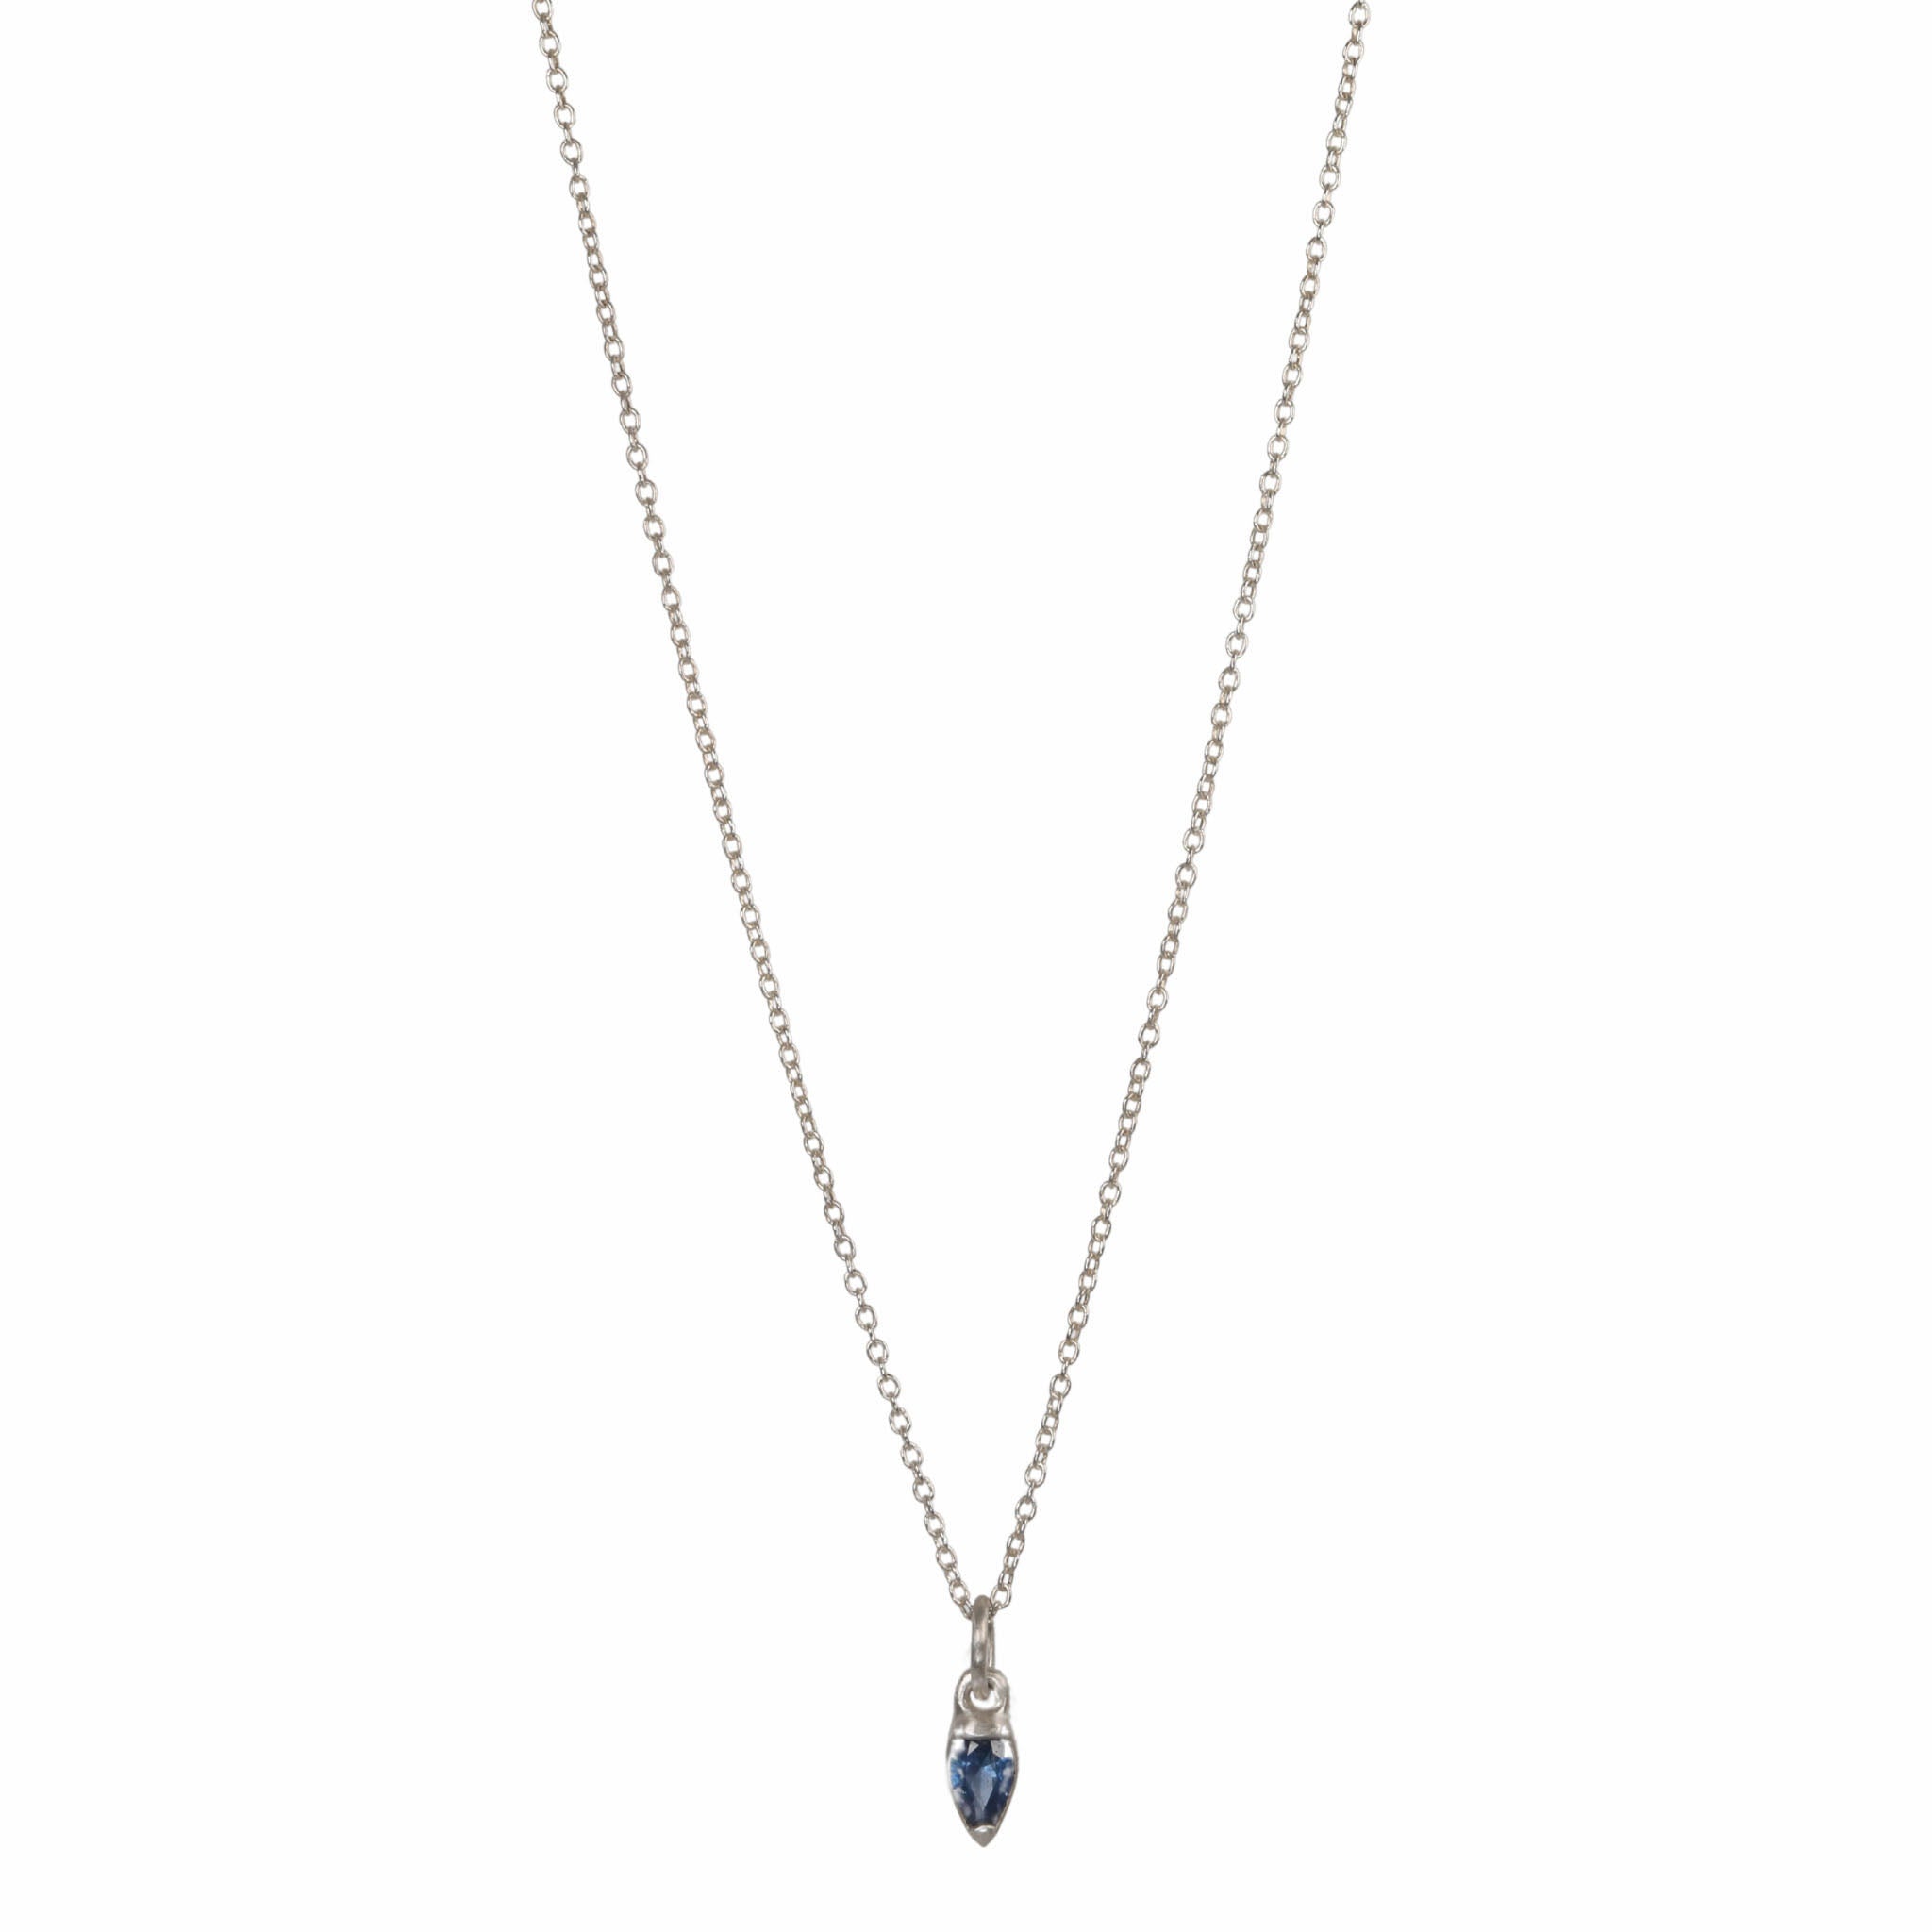 Sterling Silver and Pear-Shaped Blue Sapphire Pendant Necklace.